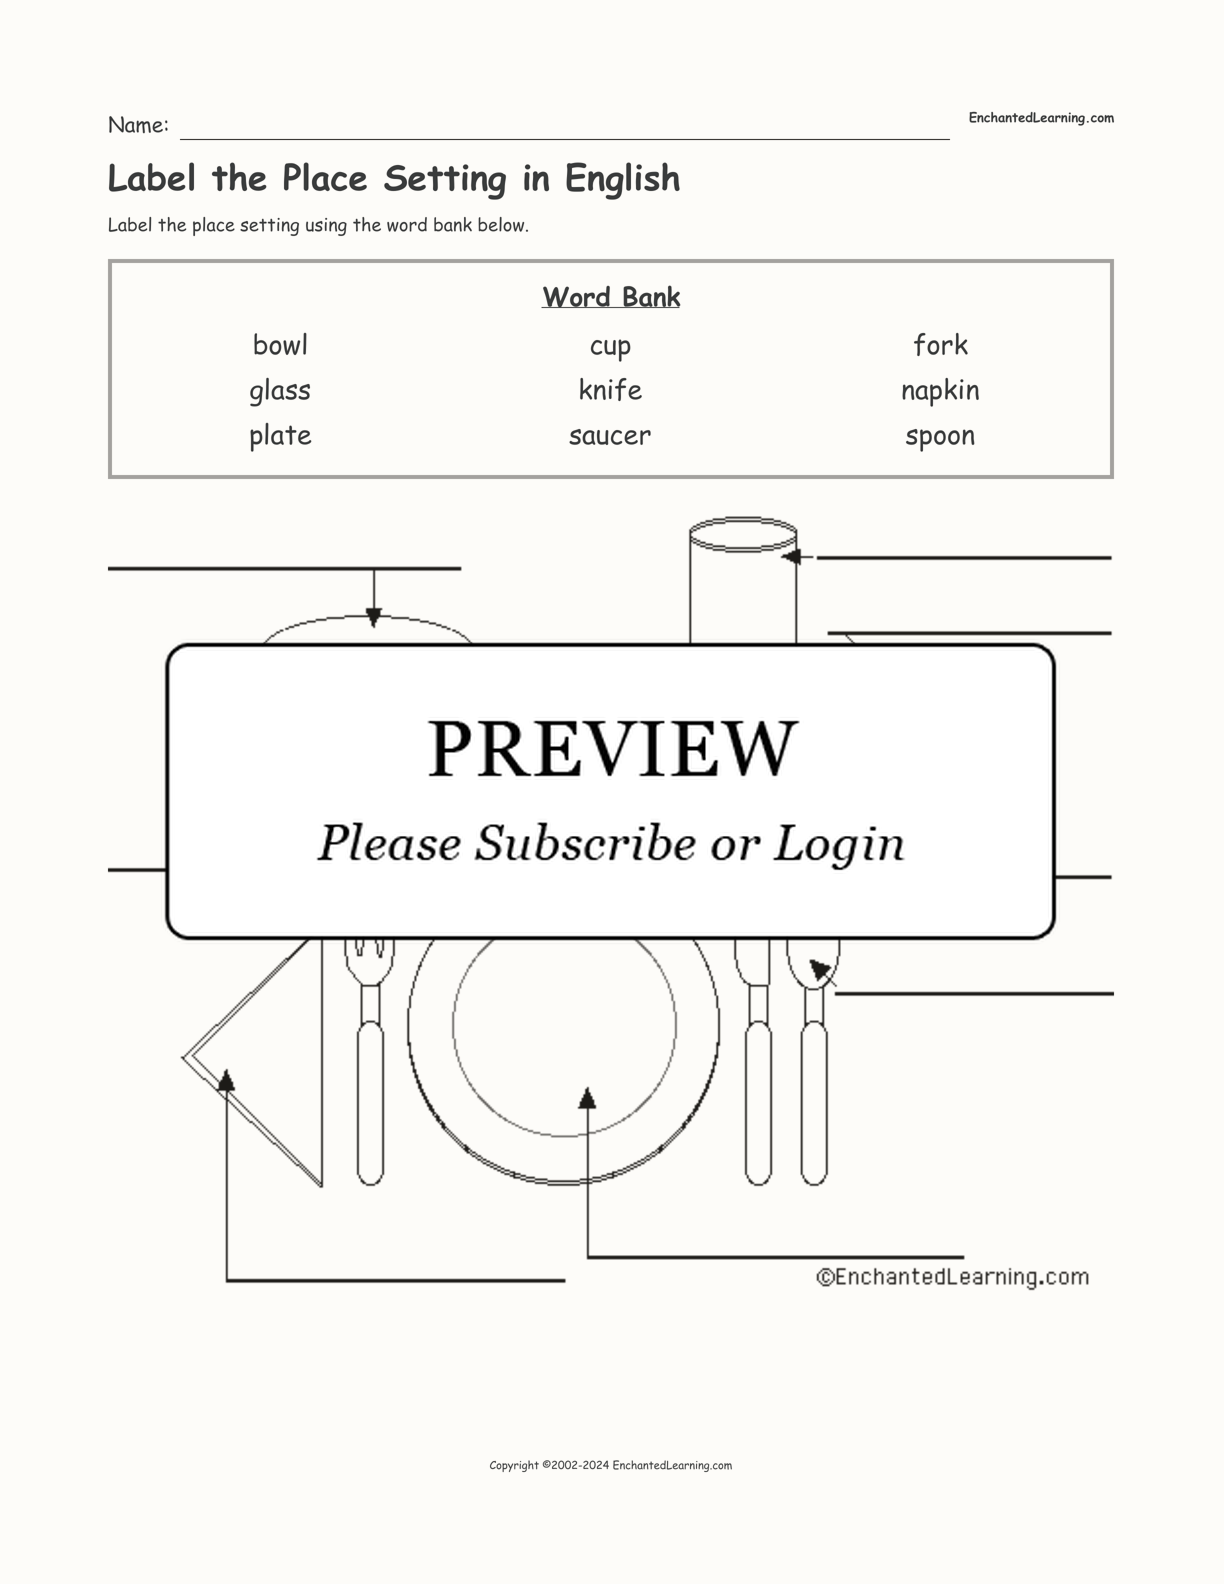 Label the Place Setting in English interactive worksheet page 1